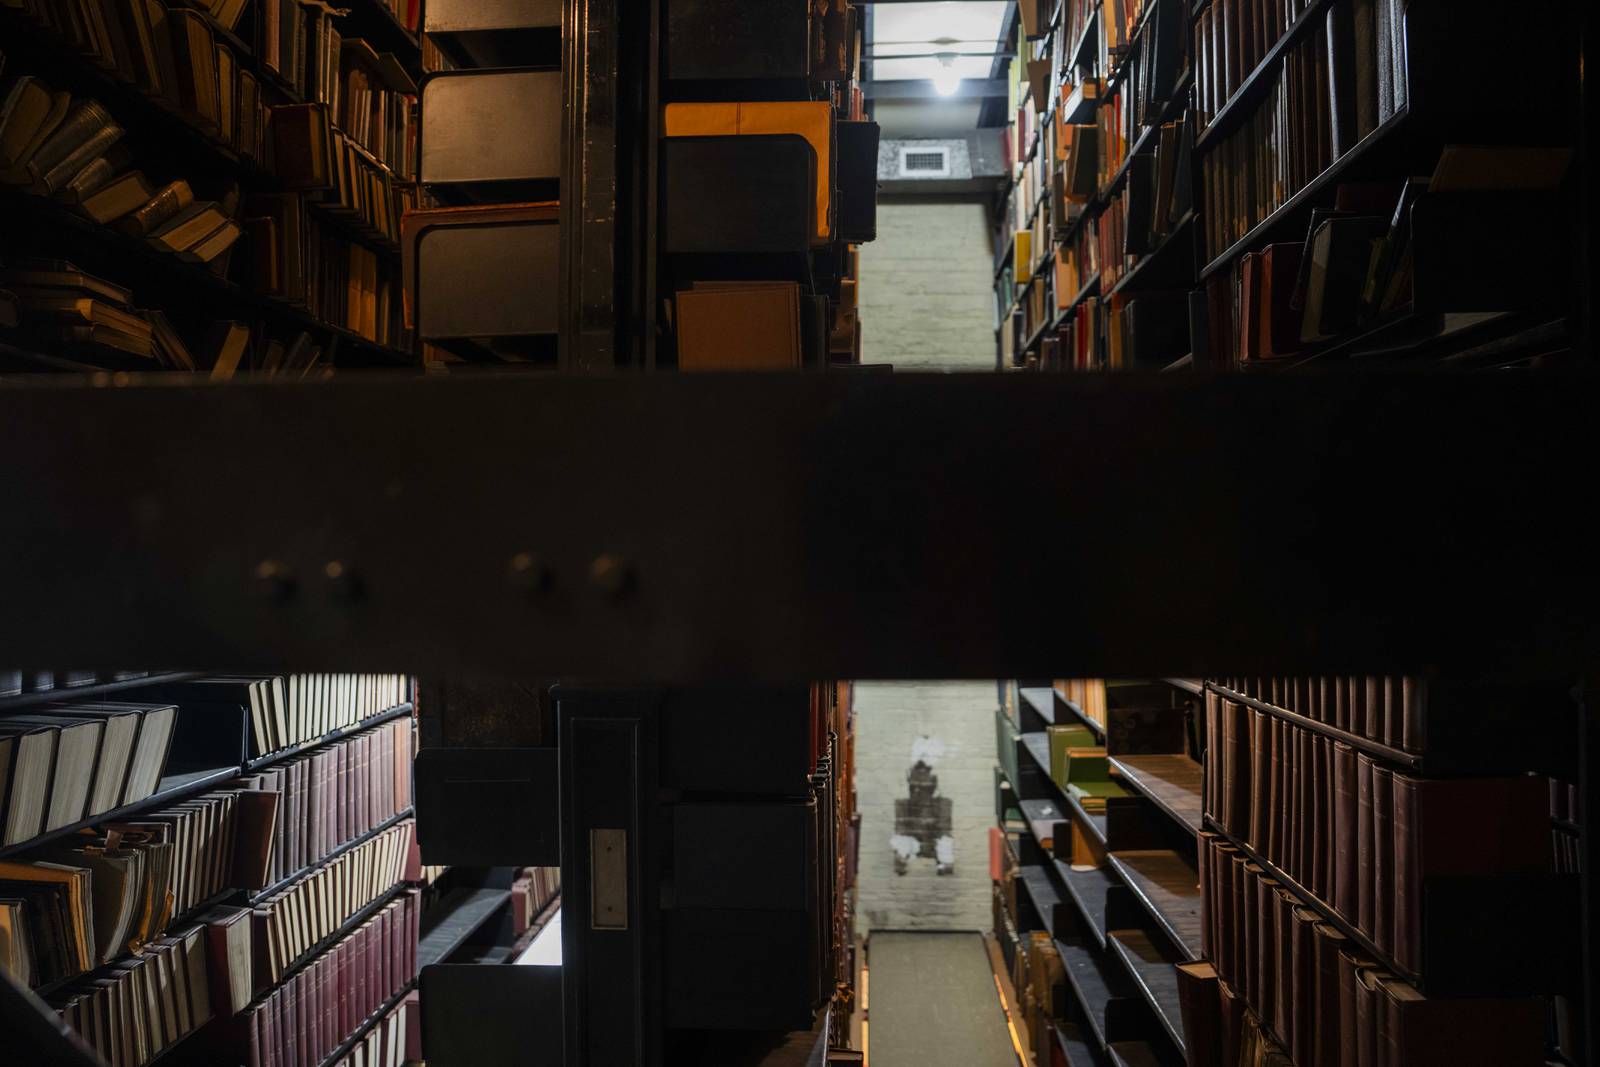 The library stacks at the Maryland State Medical Society are extensive, going up multiple levels and floors. The books date back to the 18th century. Here they are pictured  on August 2, 2023.